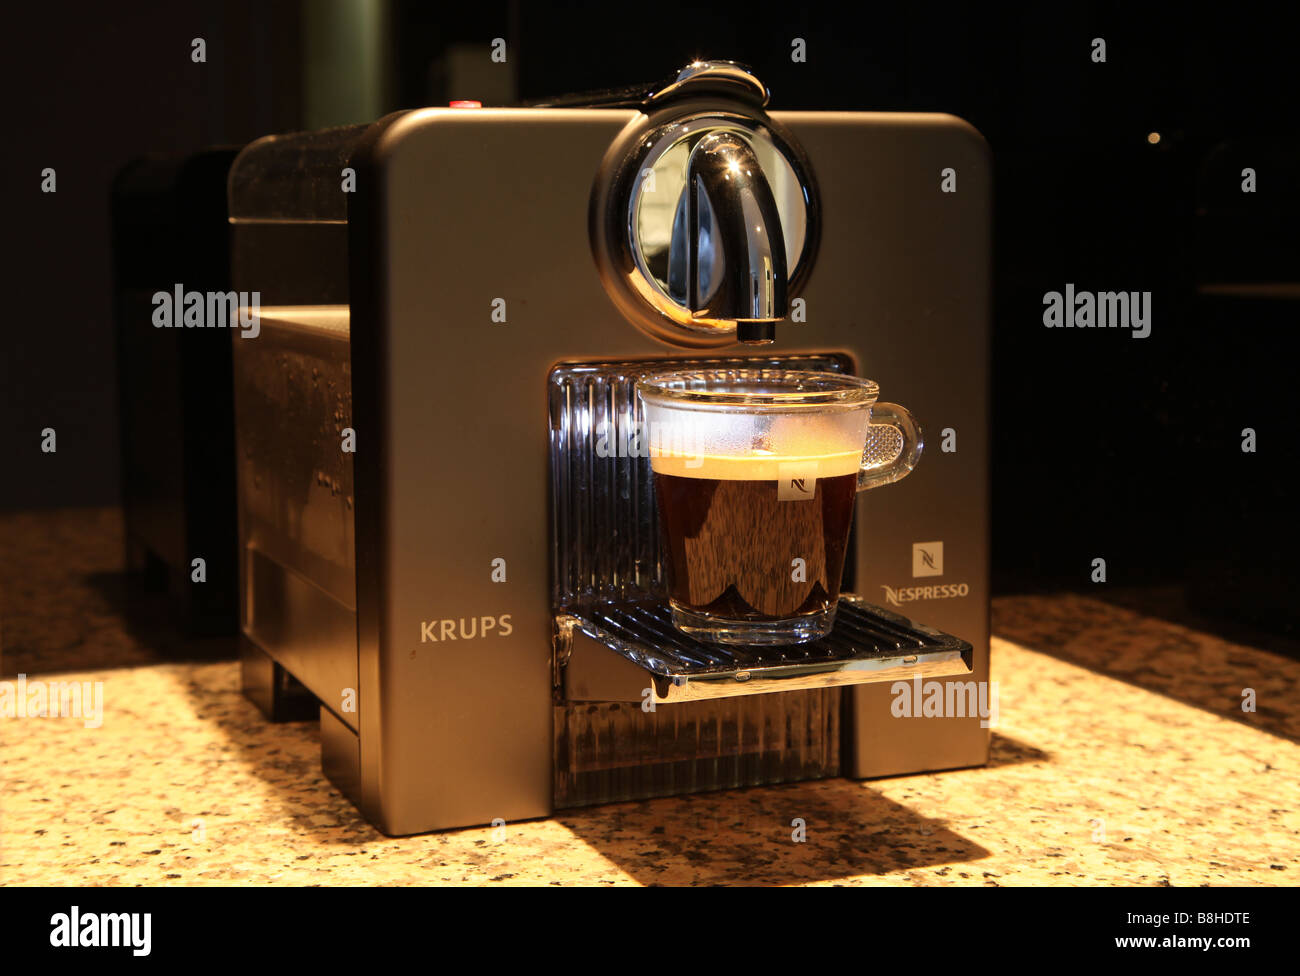 Krups Coffee Machine High Resolution Stock Photography and Images - Alamy